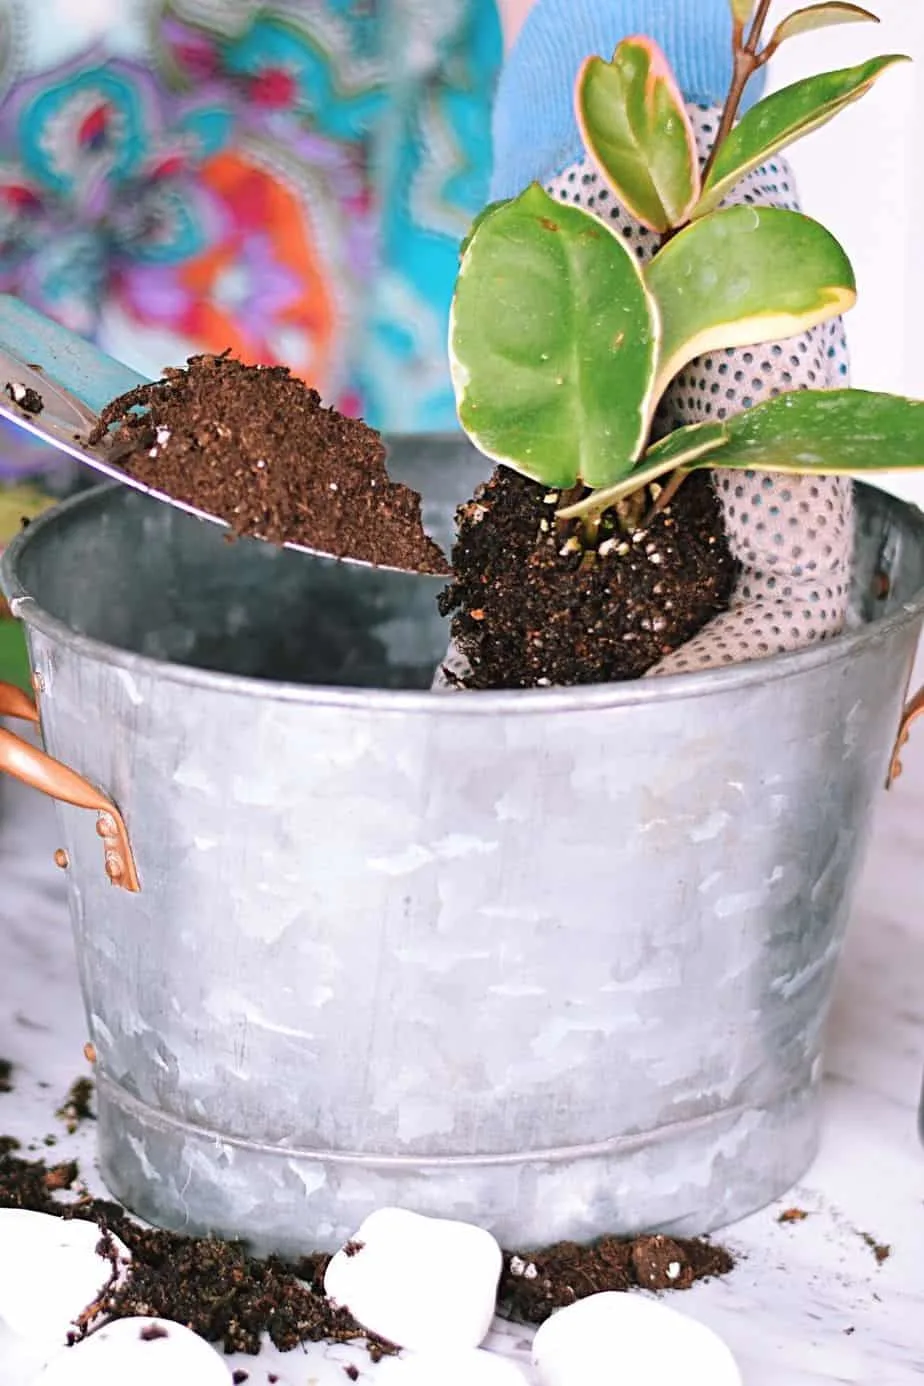 If you add coffee grounds to the potting mix for your Hoya plant, it becomes a slow-releasing fertilizer